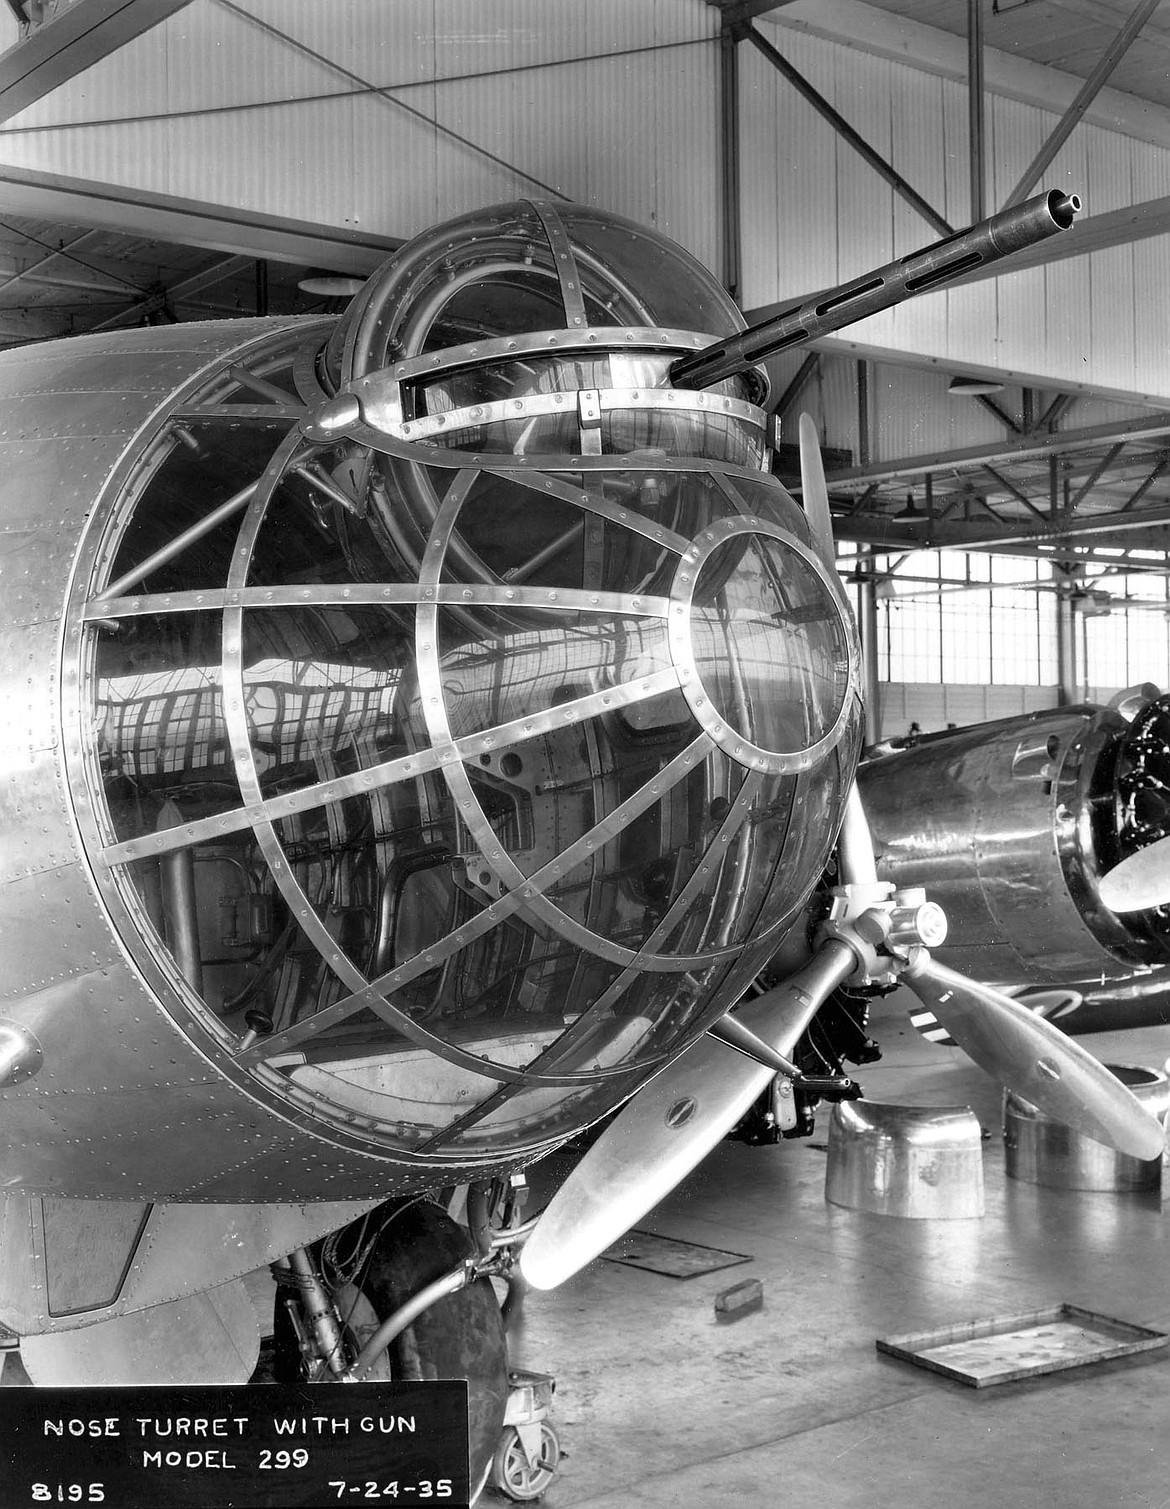 Boeing B-17 Flying Fortress’ first gun was a .30mm caliber machine-gun mounted in the nose of the prototype XB-17 (Model 299). The last production B-17G models had 13 .50mm caliber guns, bristling from all sides.